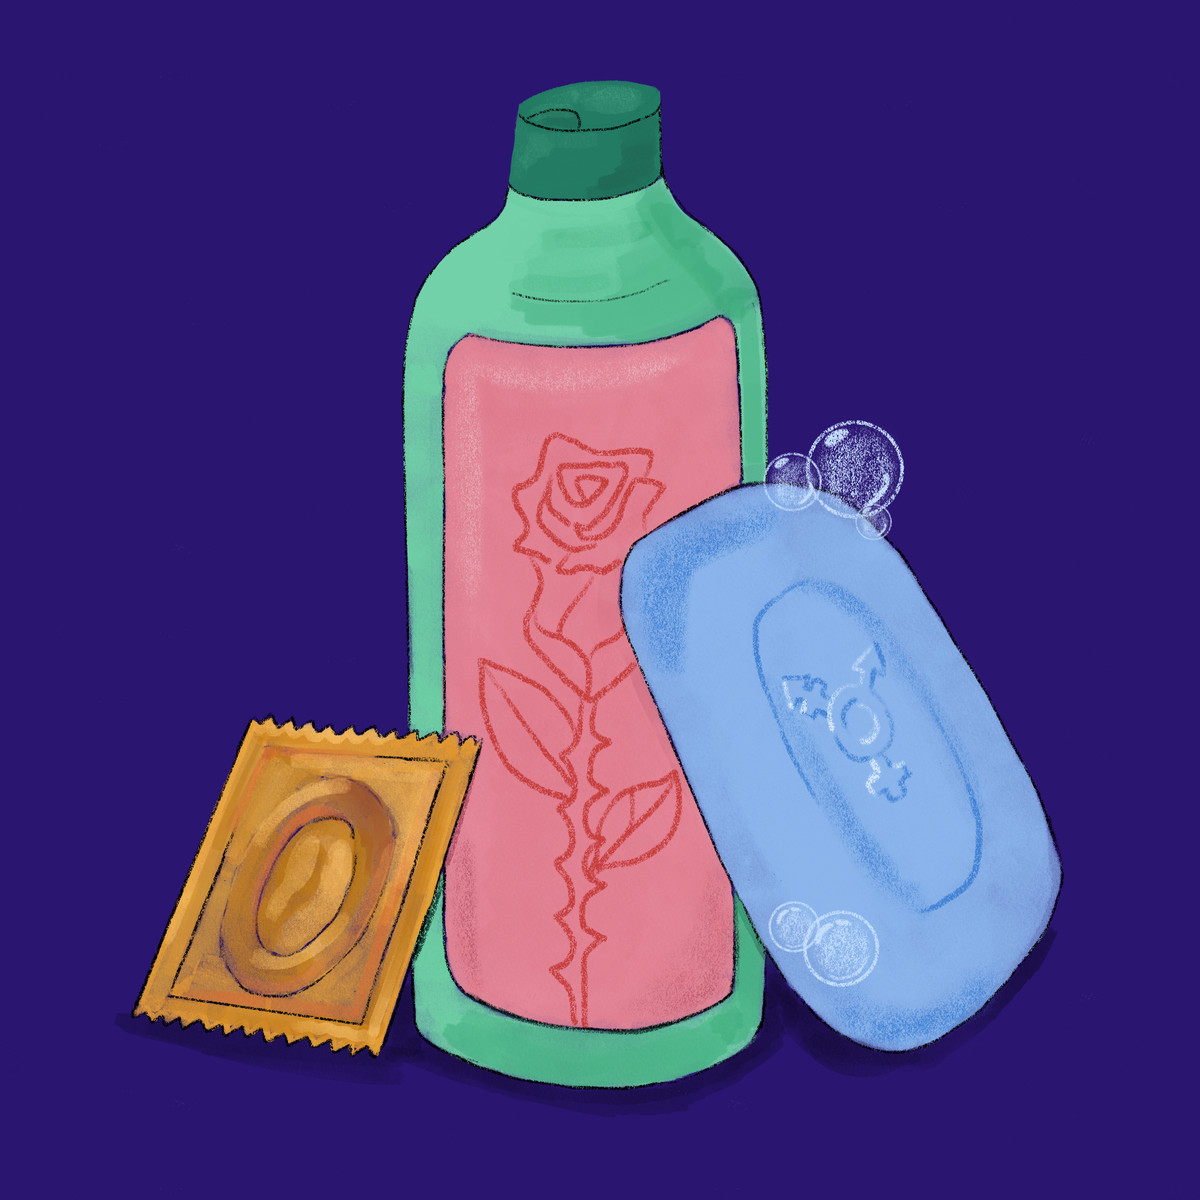 An illustration depicts some of the products snack closets offer their guests in addition to food, like condoms, bottles of shampoo, and soap.